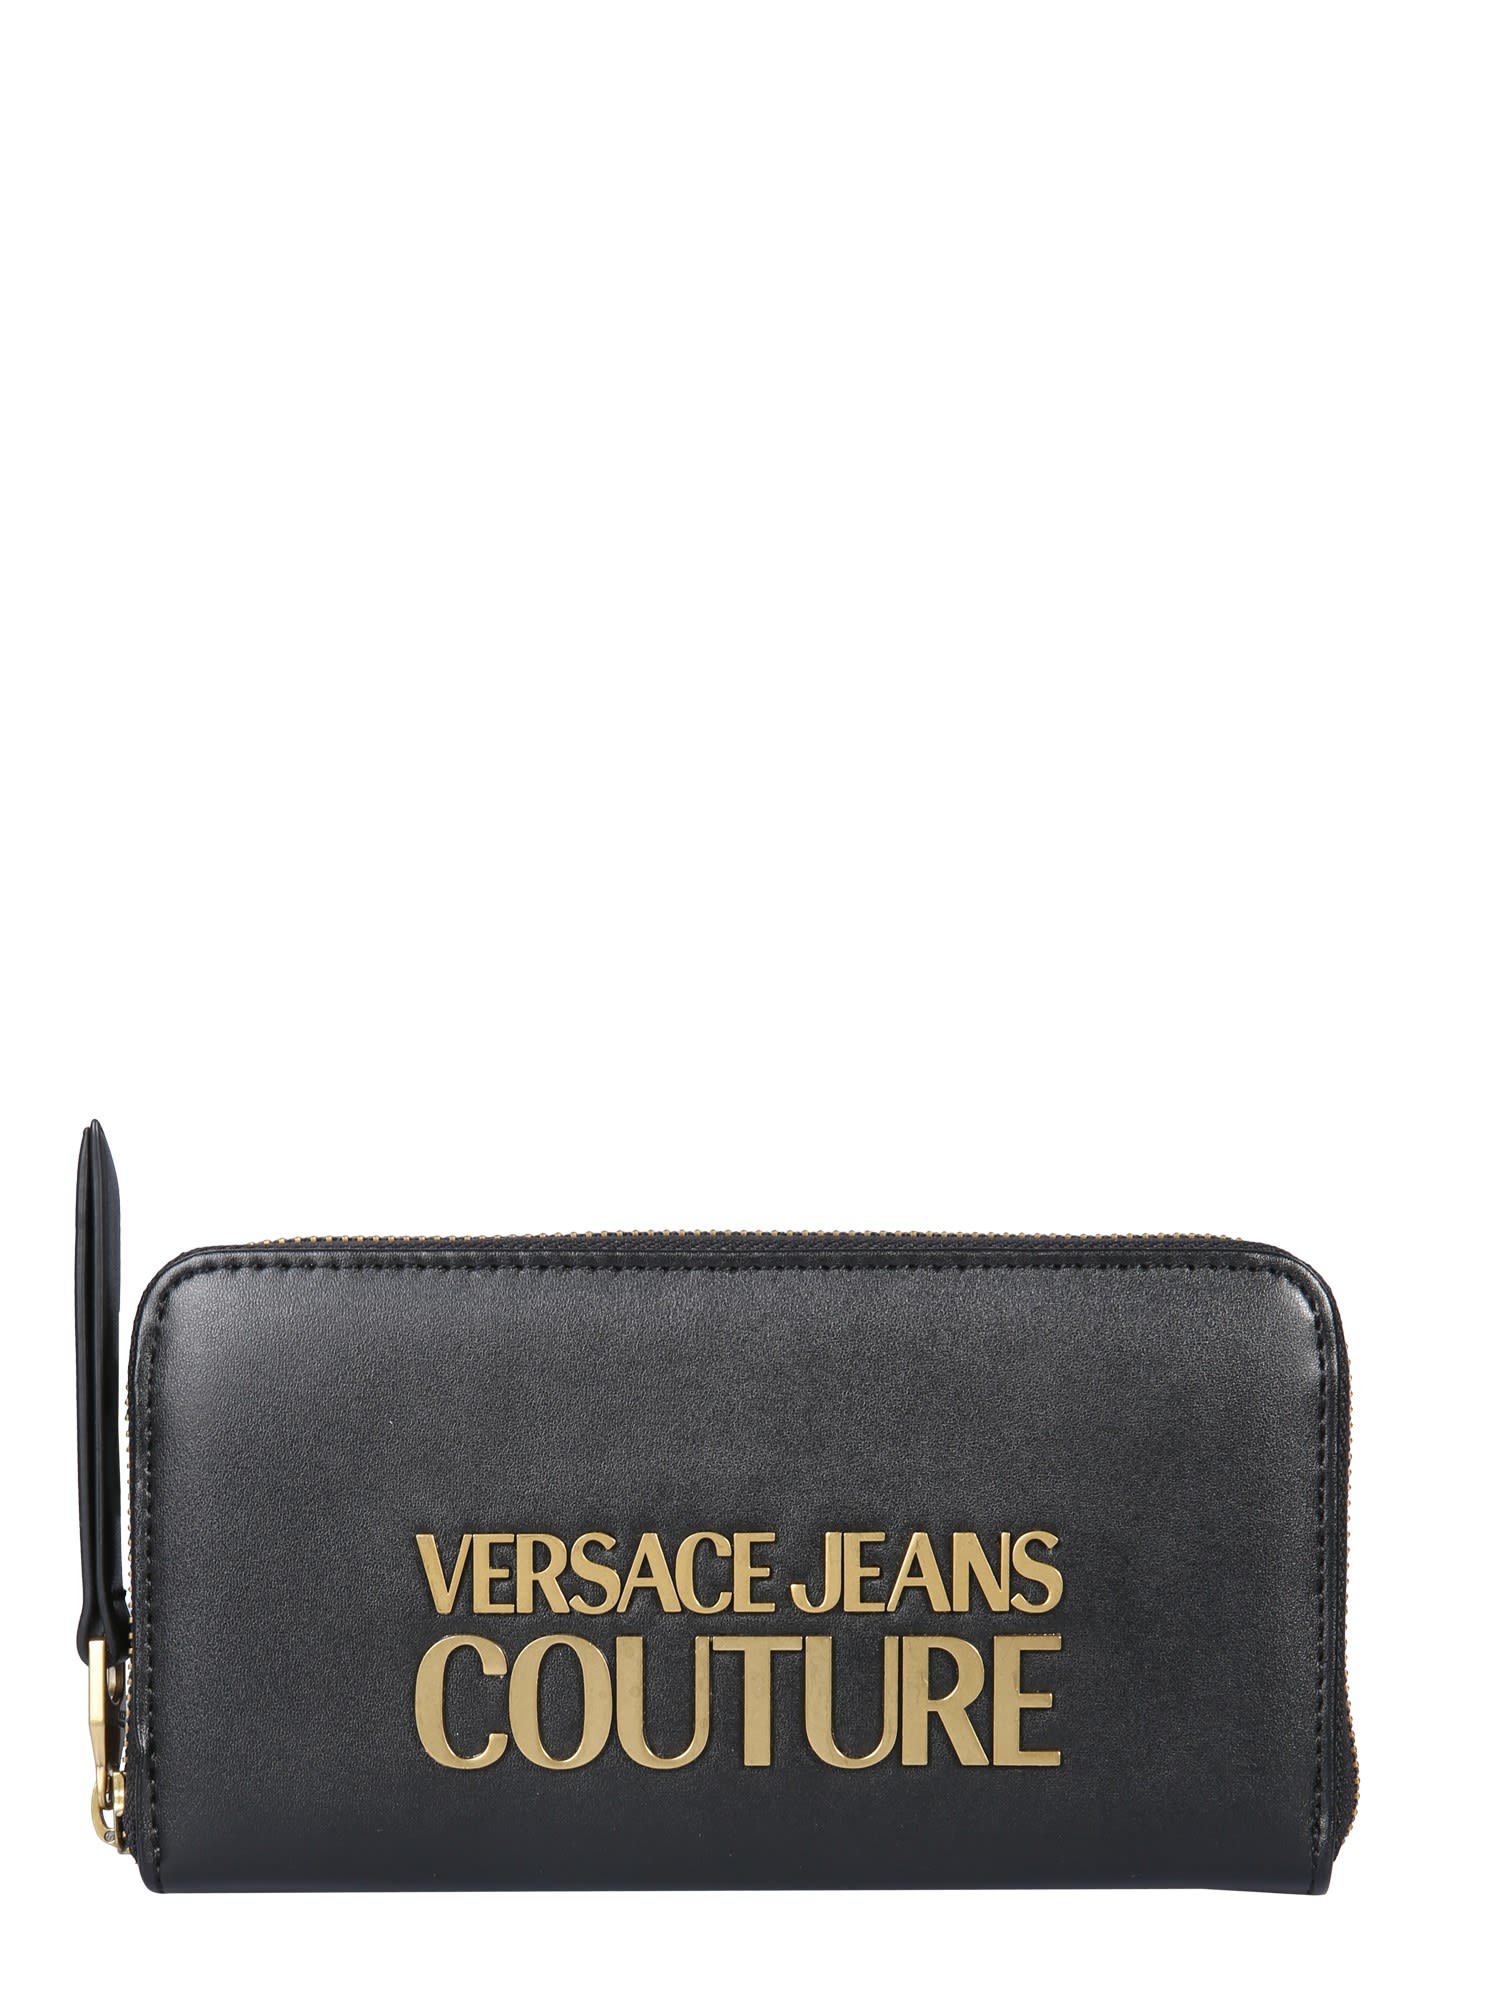 VERSACE JEANS COUTURE LOGO WALLET